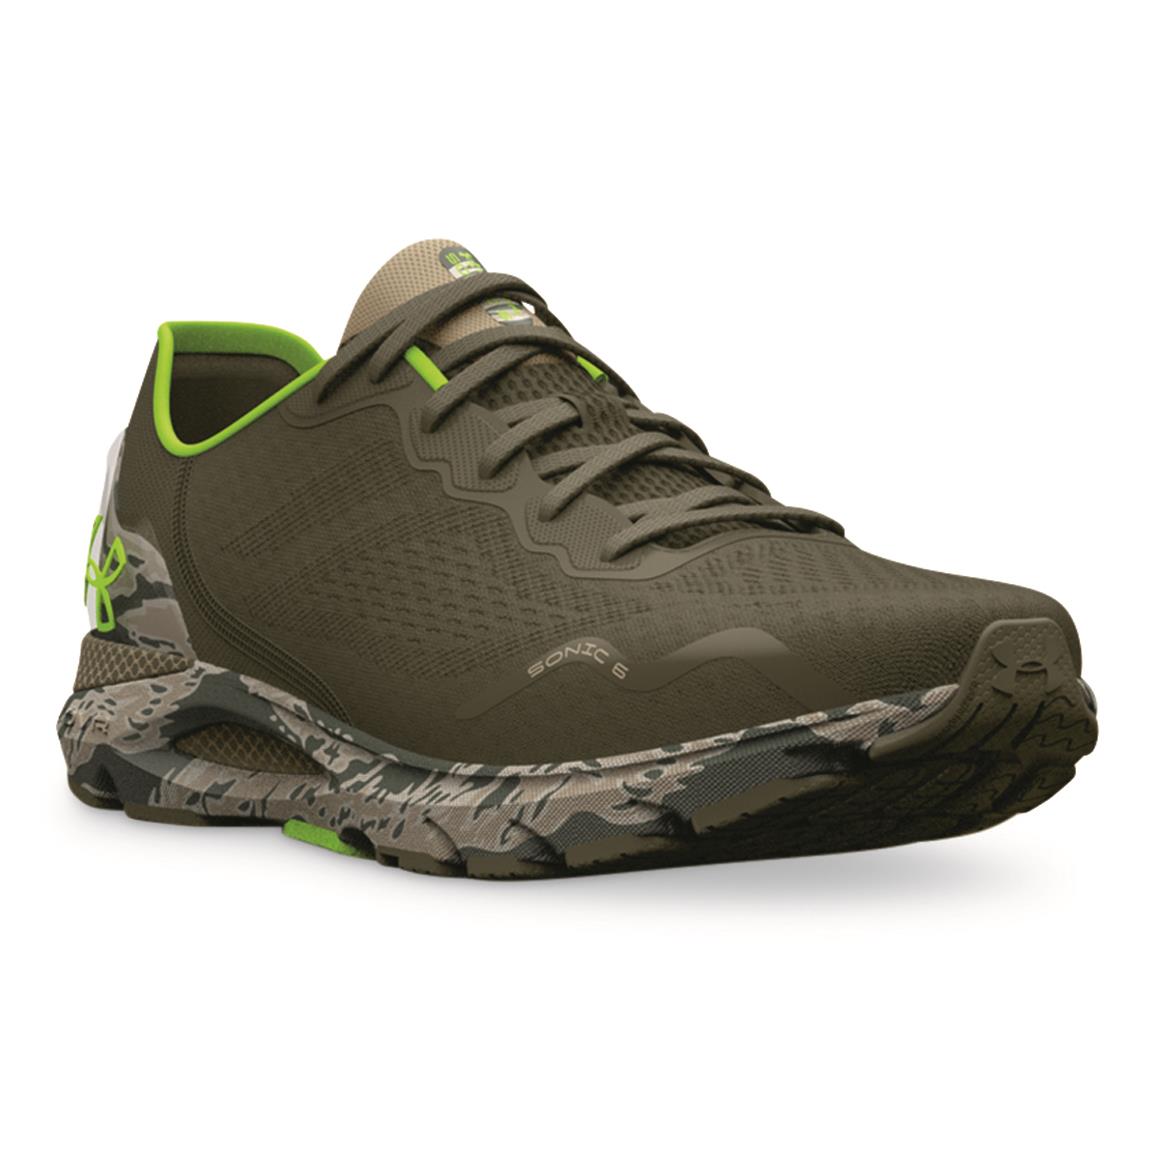 Under Armour Men's HOVR Sonic 6 Running Shoes, Mossy Taupe/mossy Taupe/lime Surge